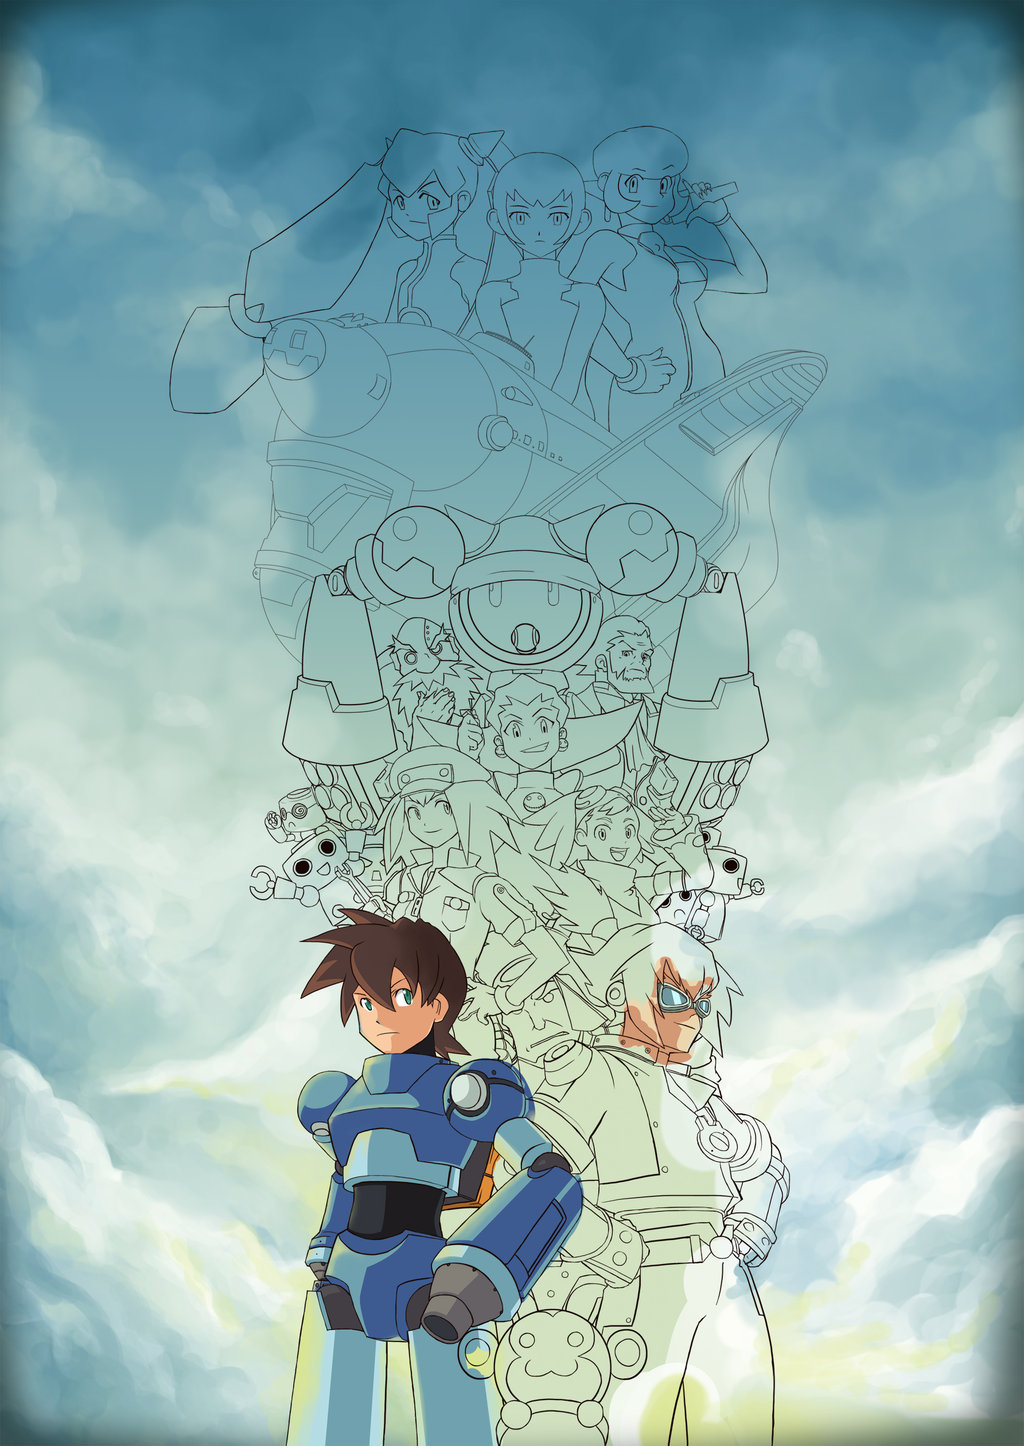 Tribute To Megaman Legends by Springs on DeviantArt